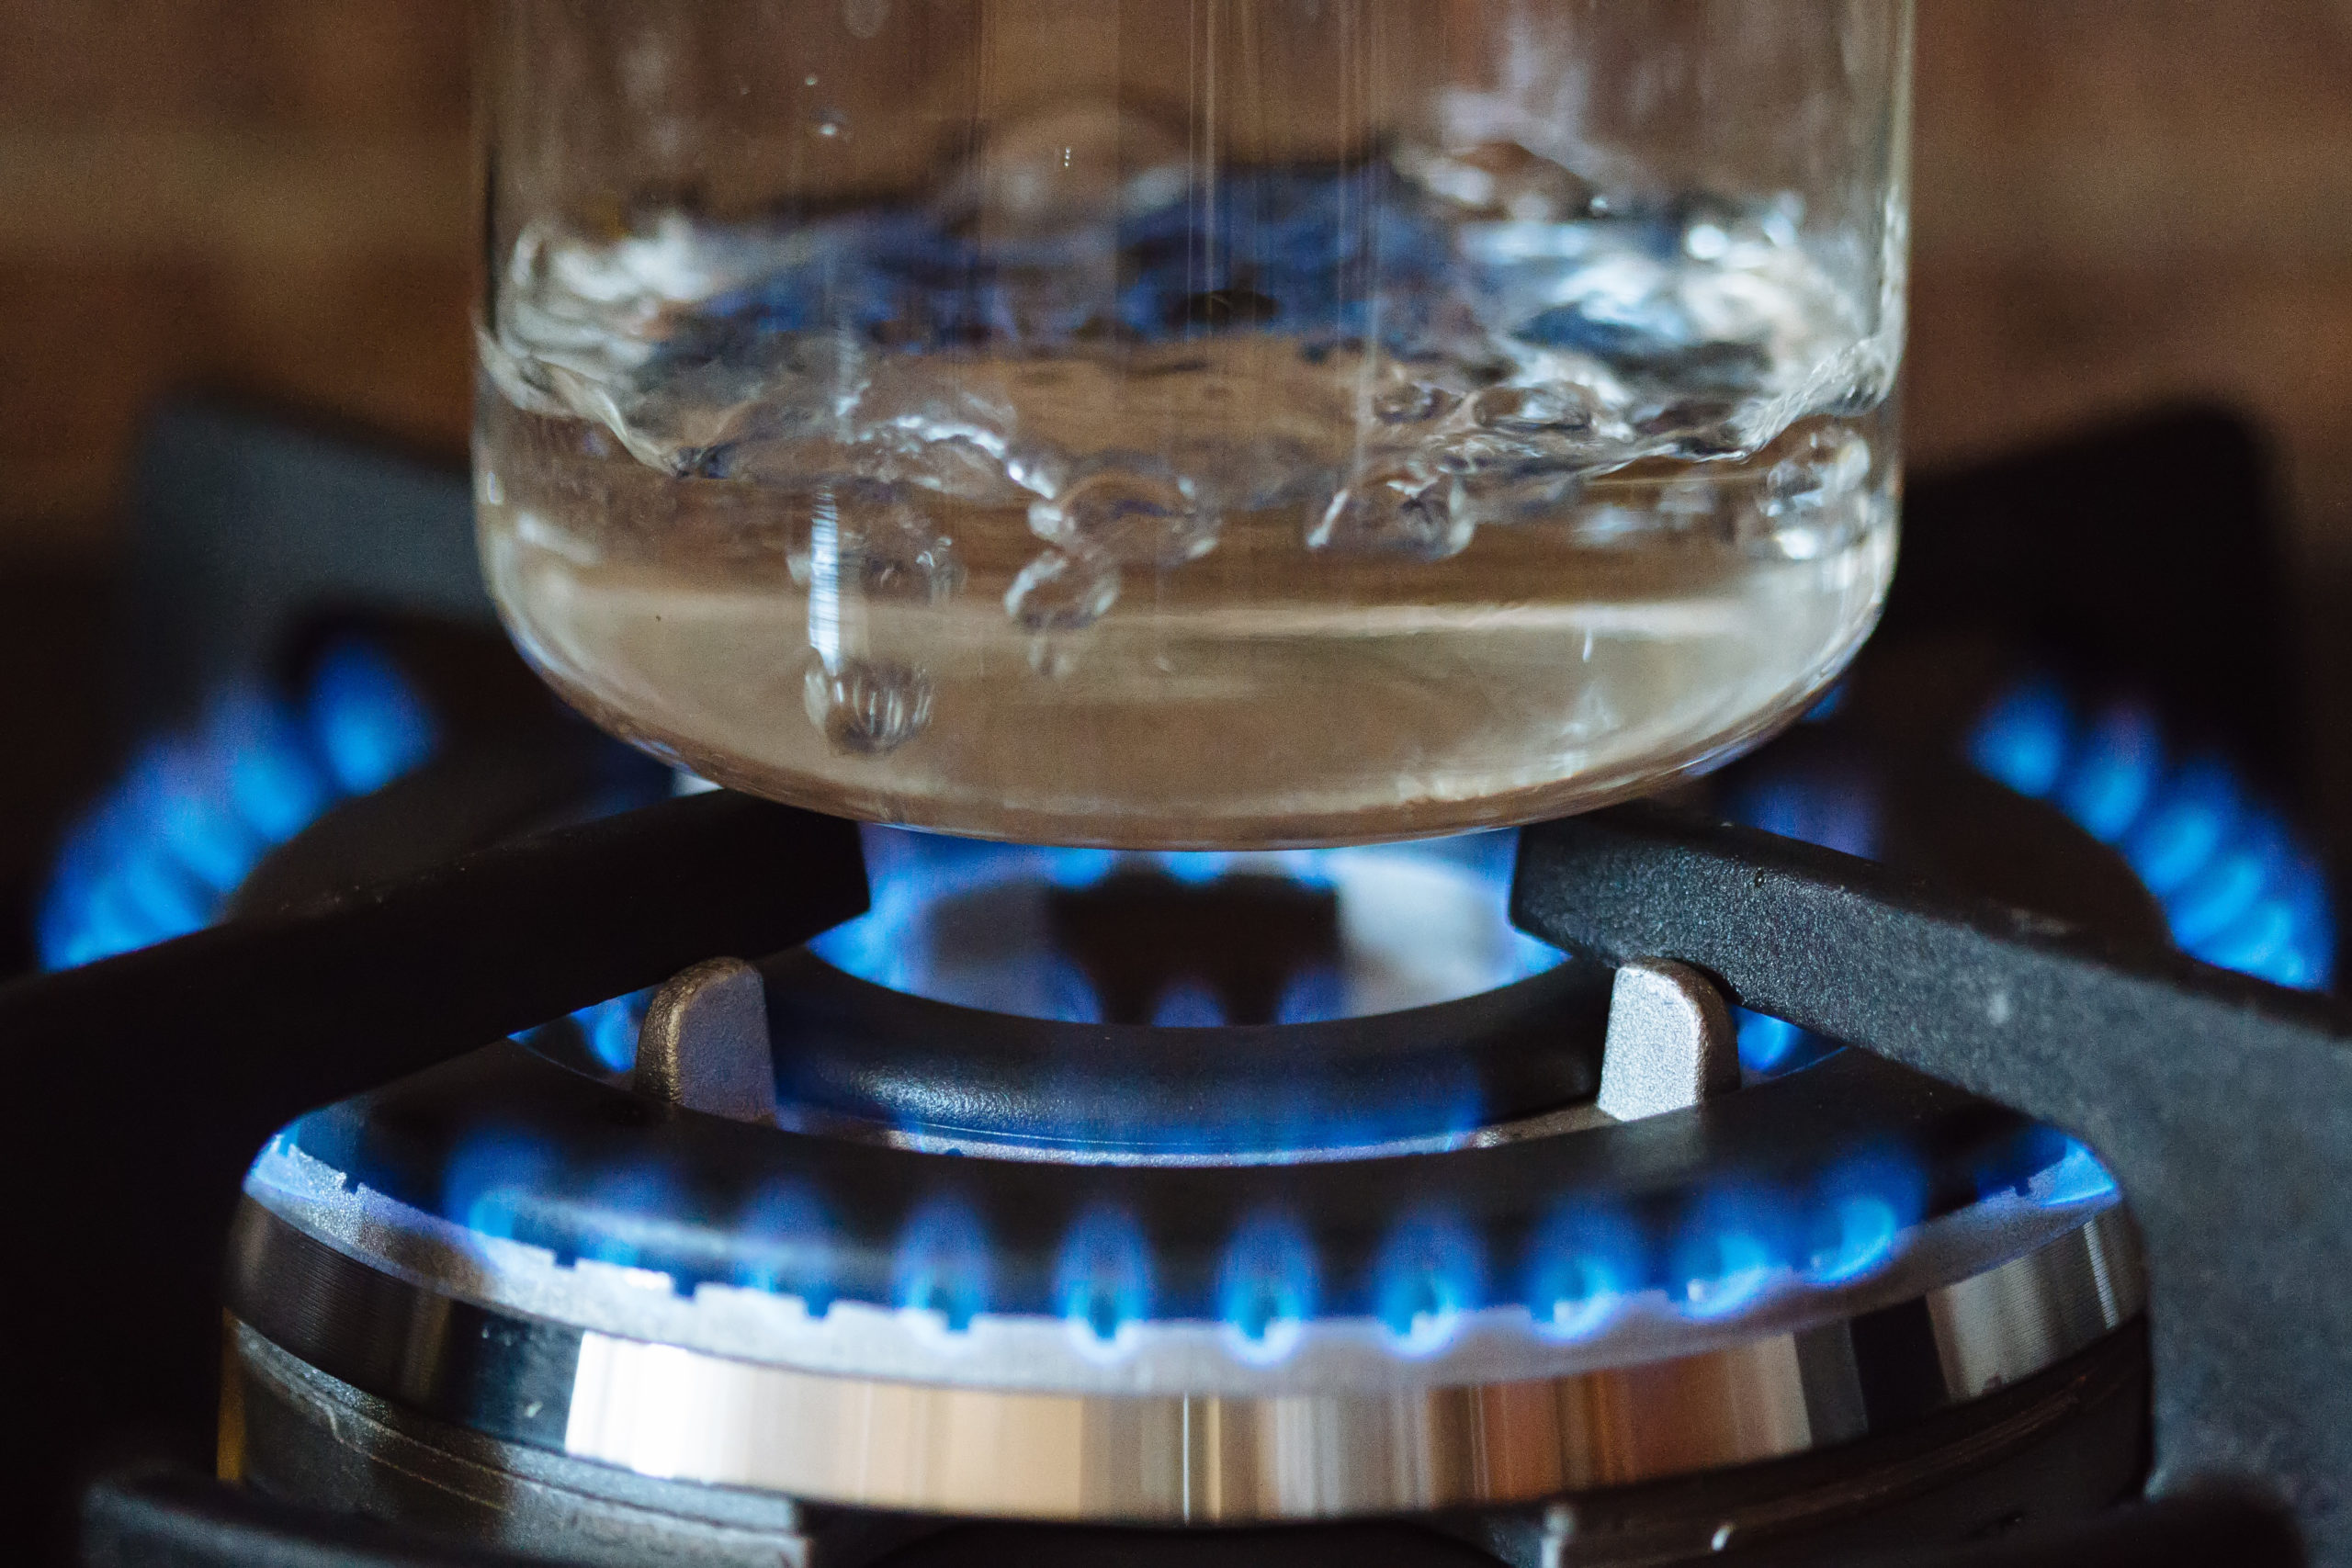 Water boiling on gas stove